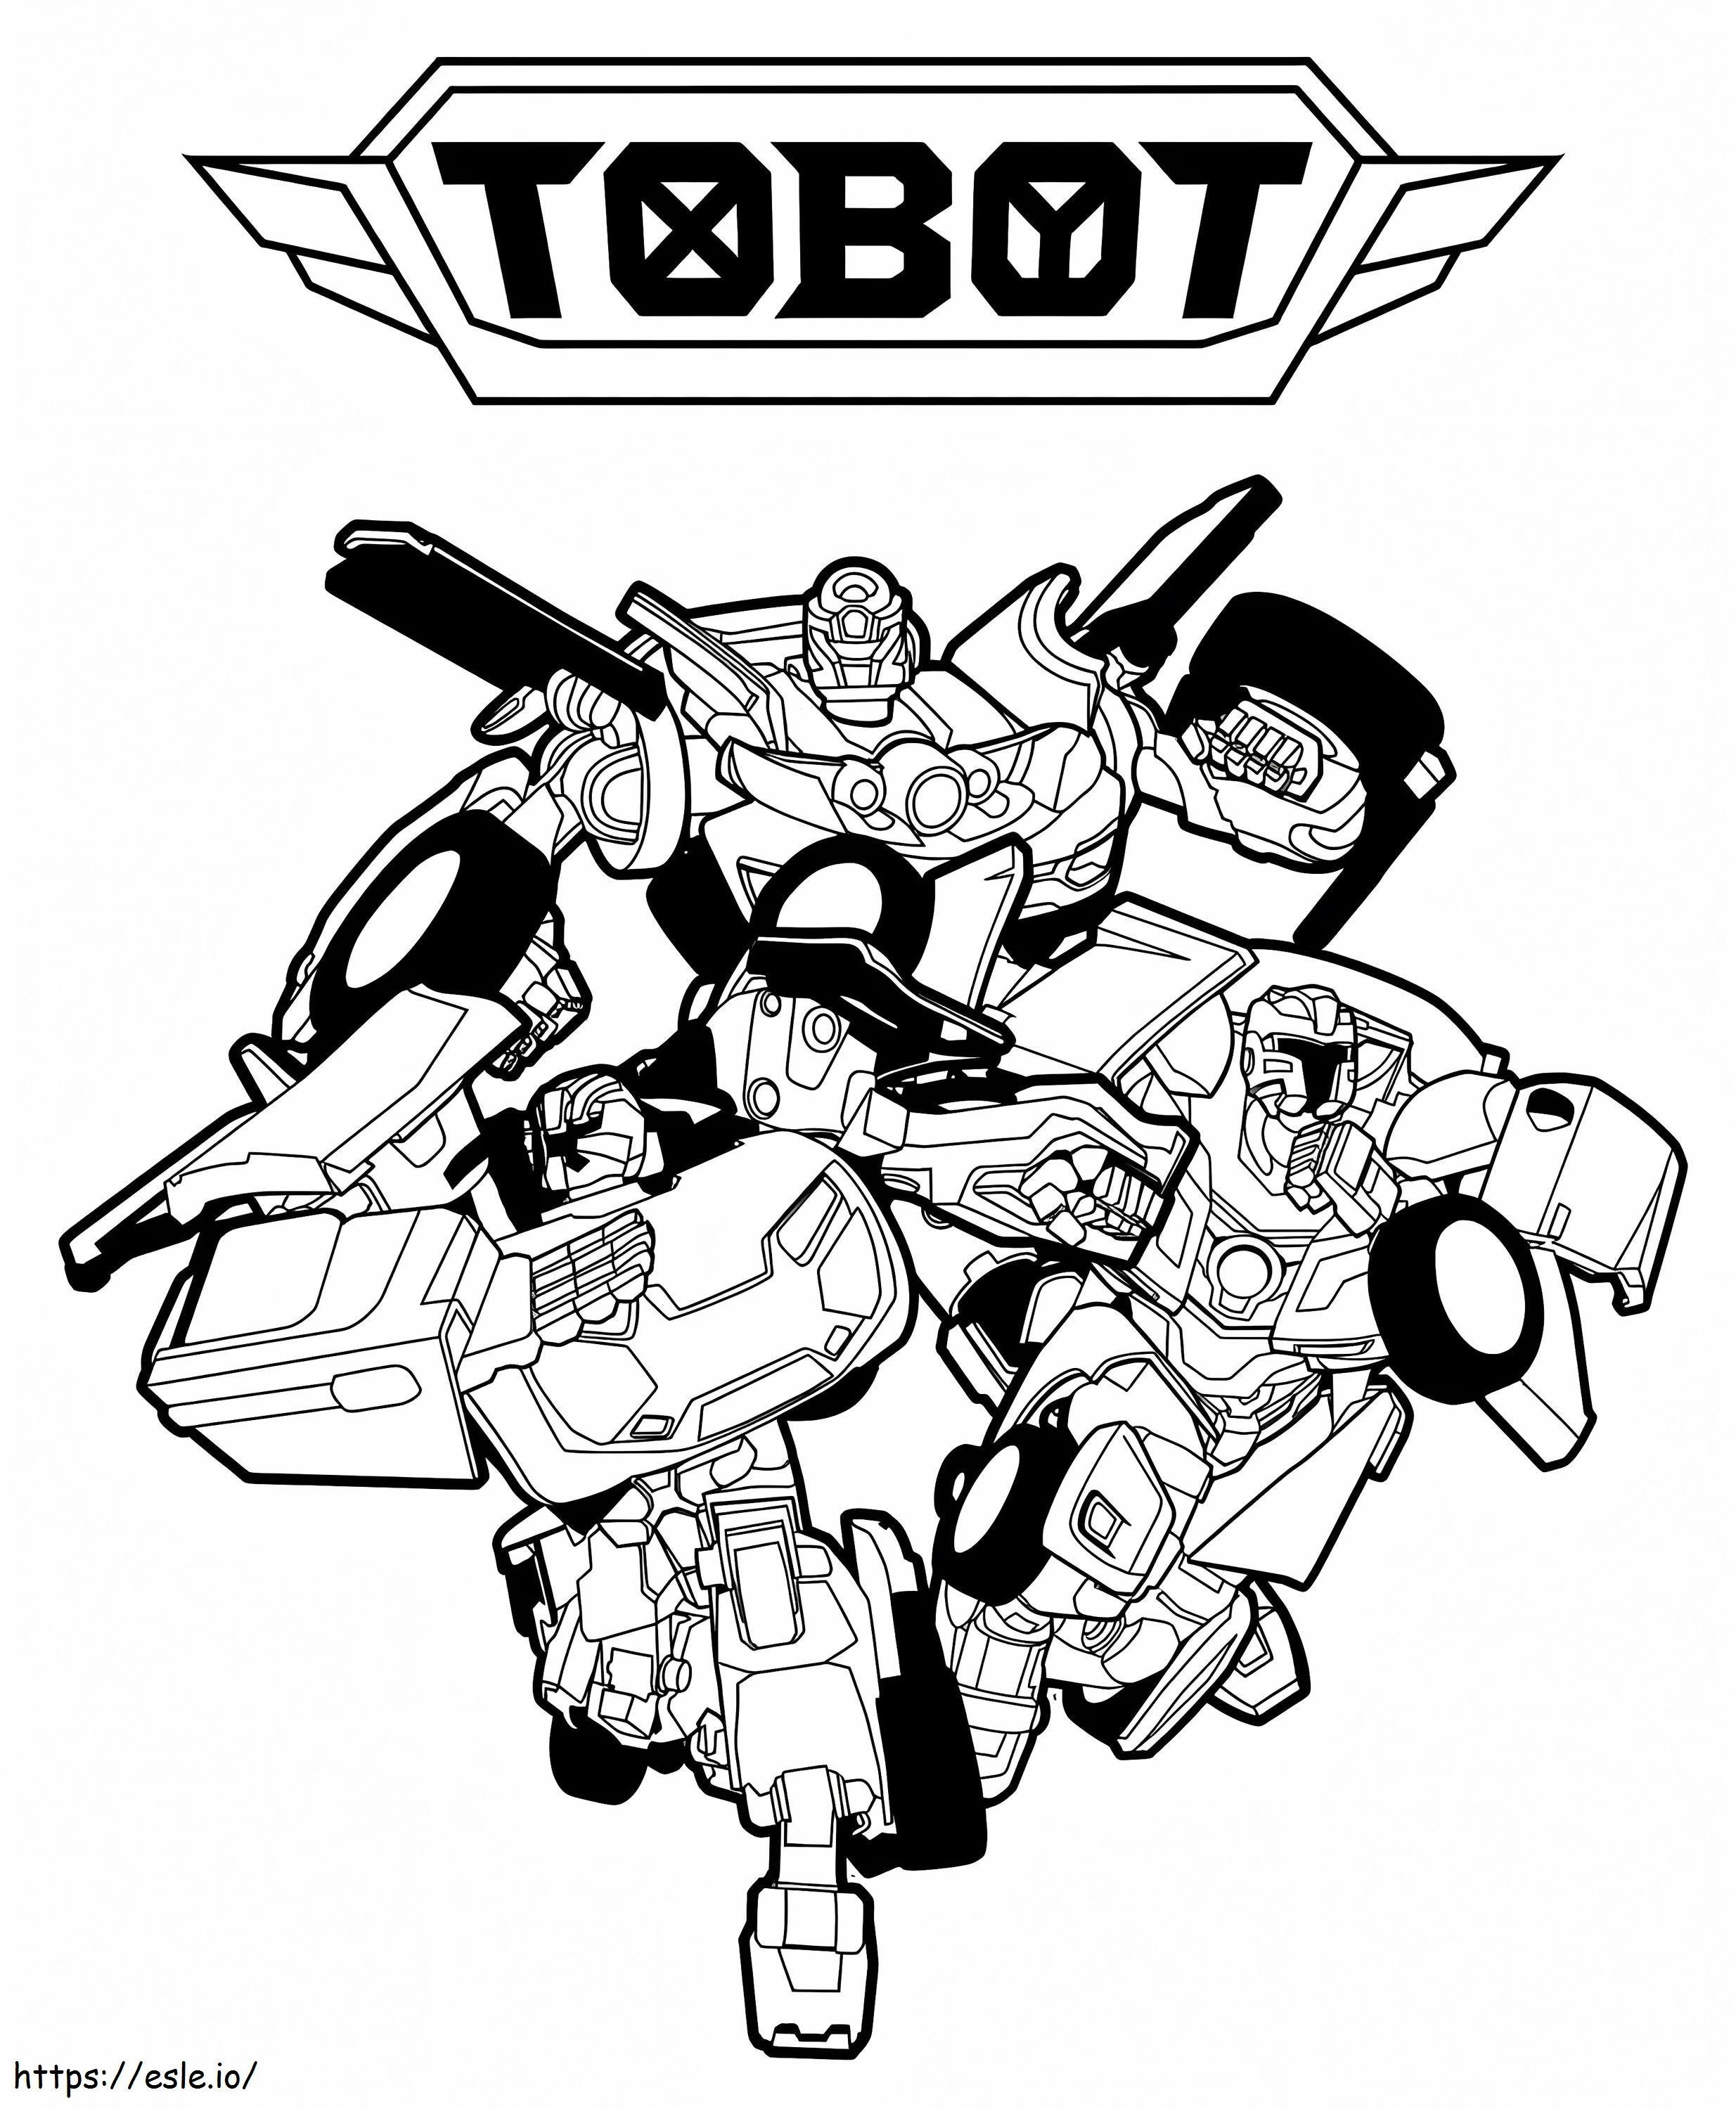 Action Tobot coloring page